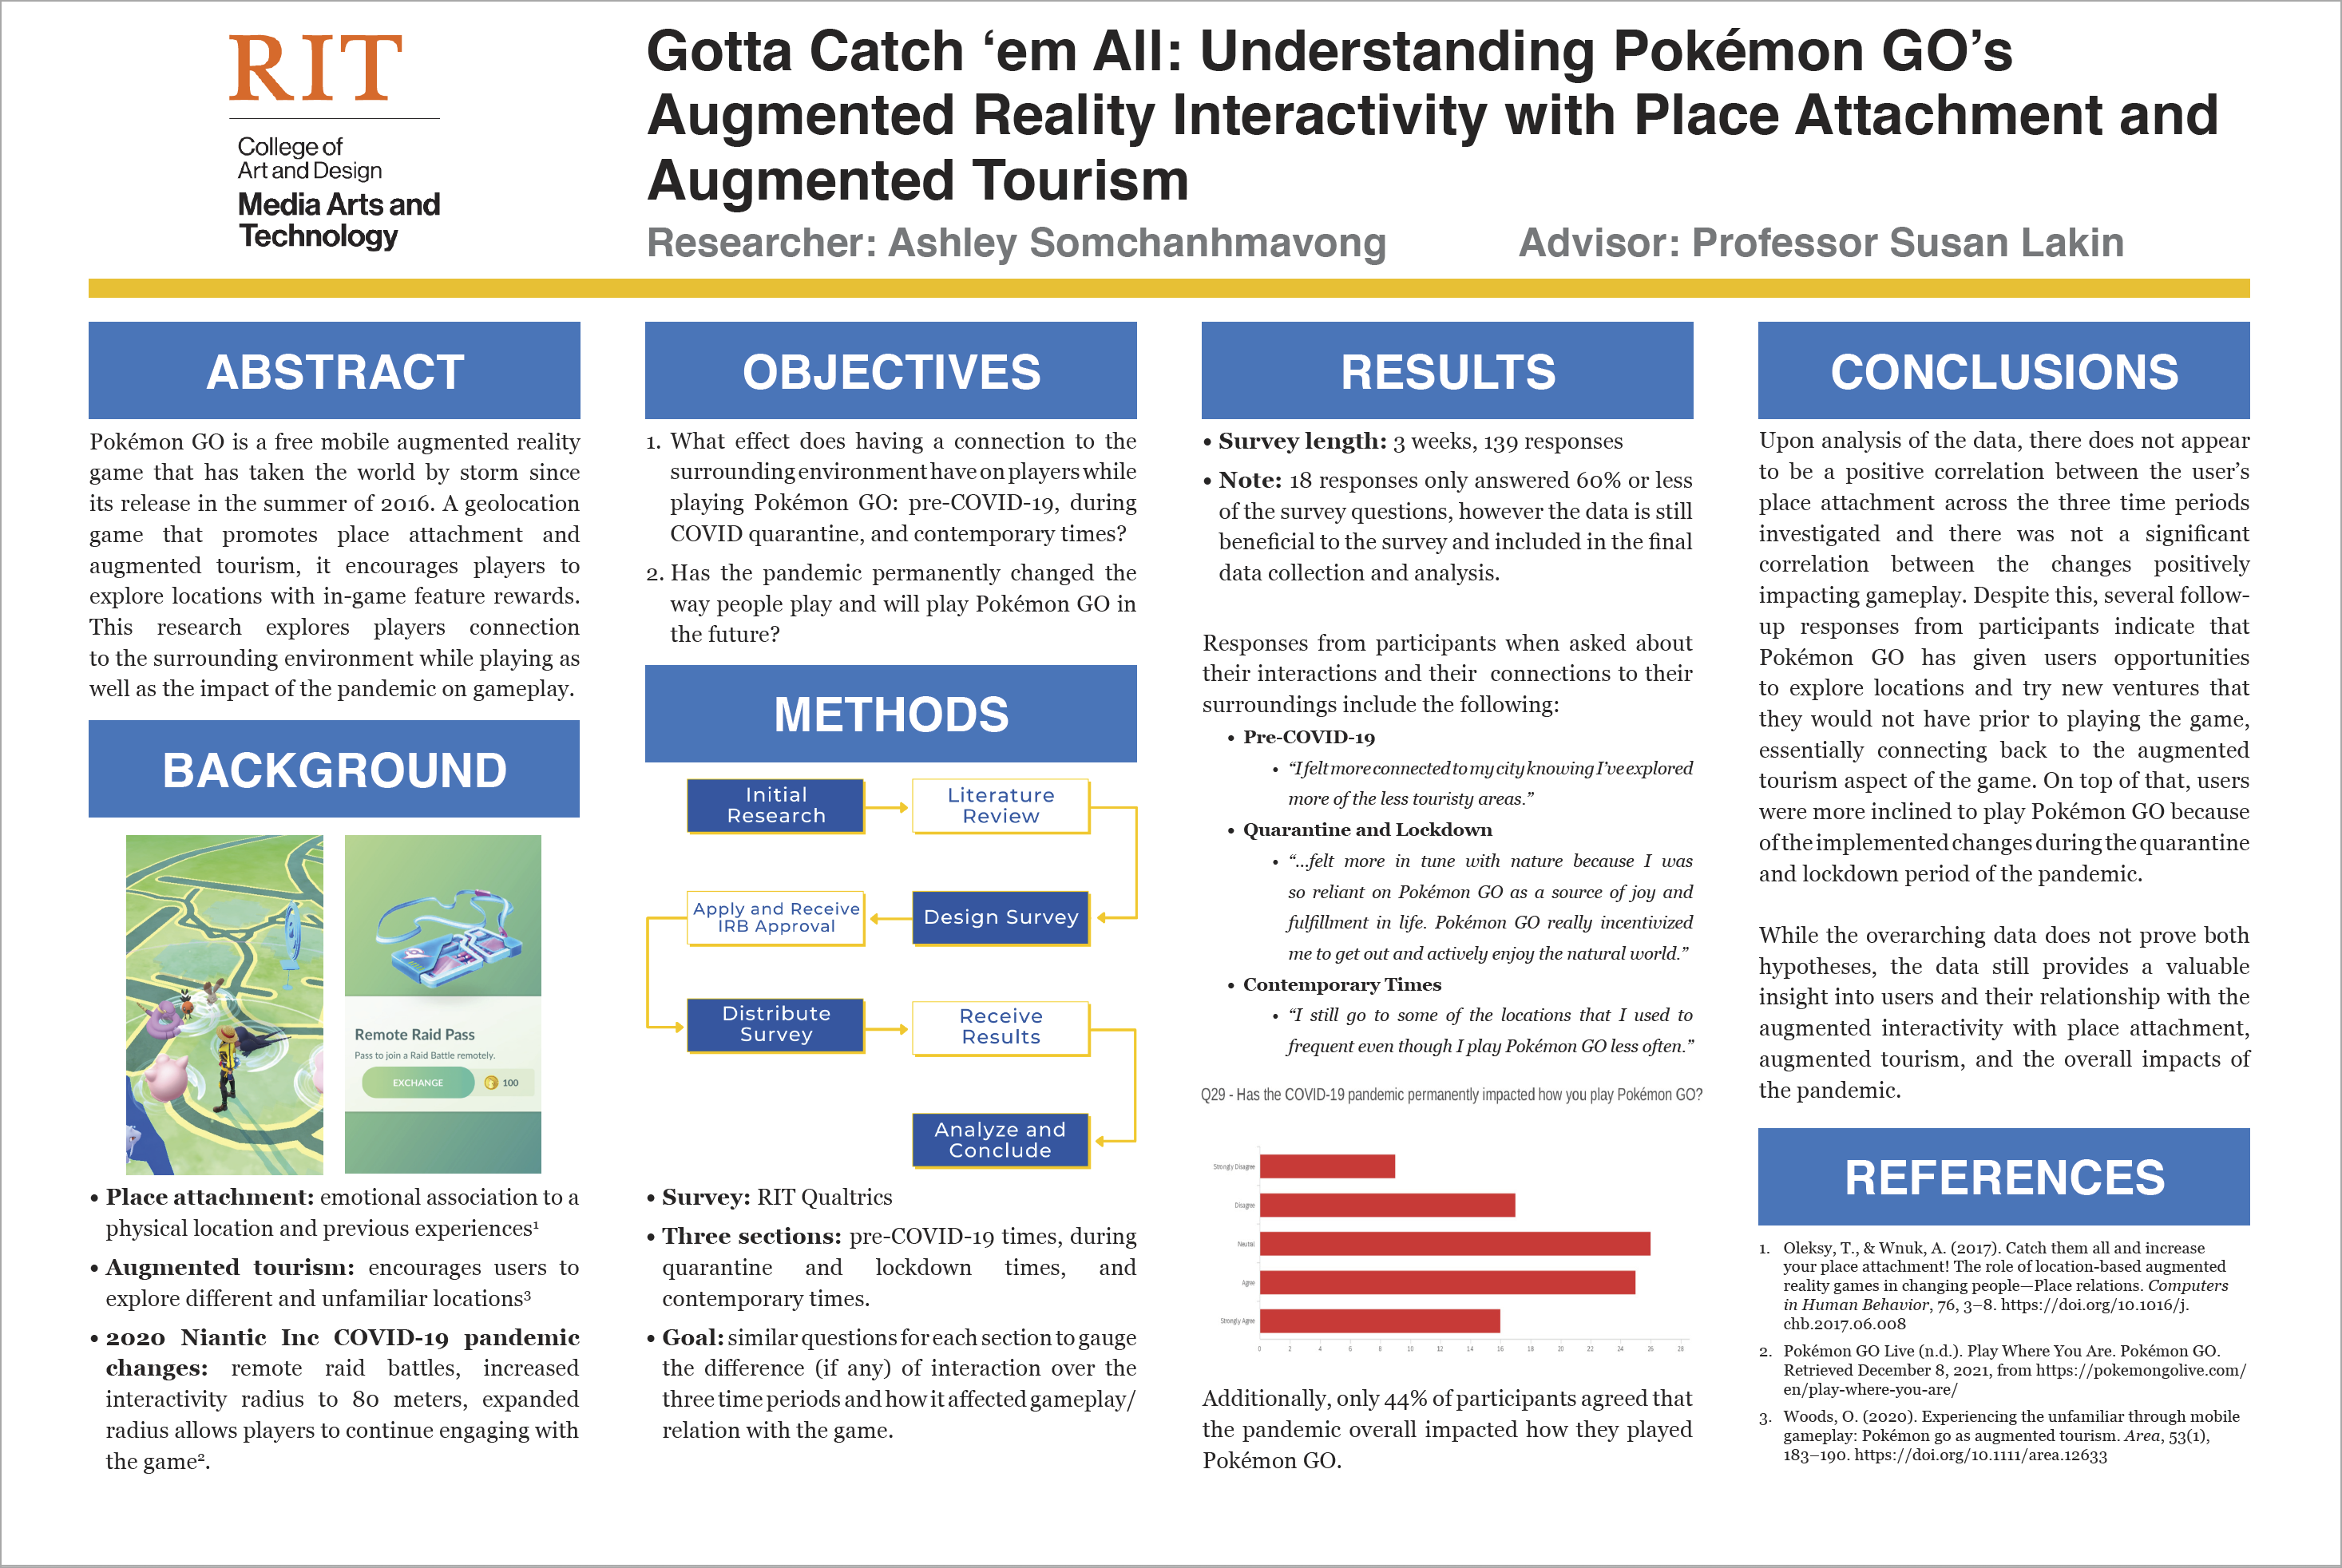 A poster highlighting research on Pokemon Go's AR capabilities.